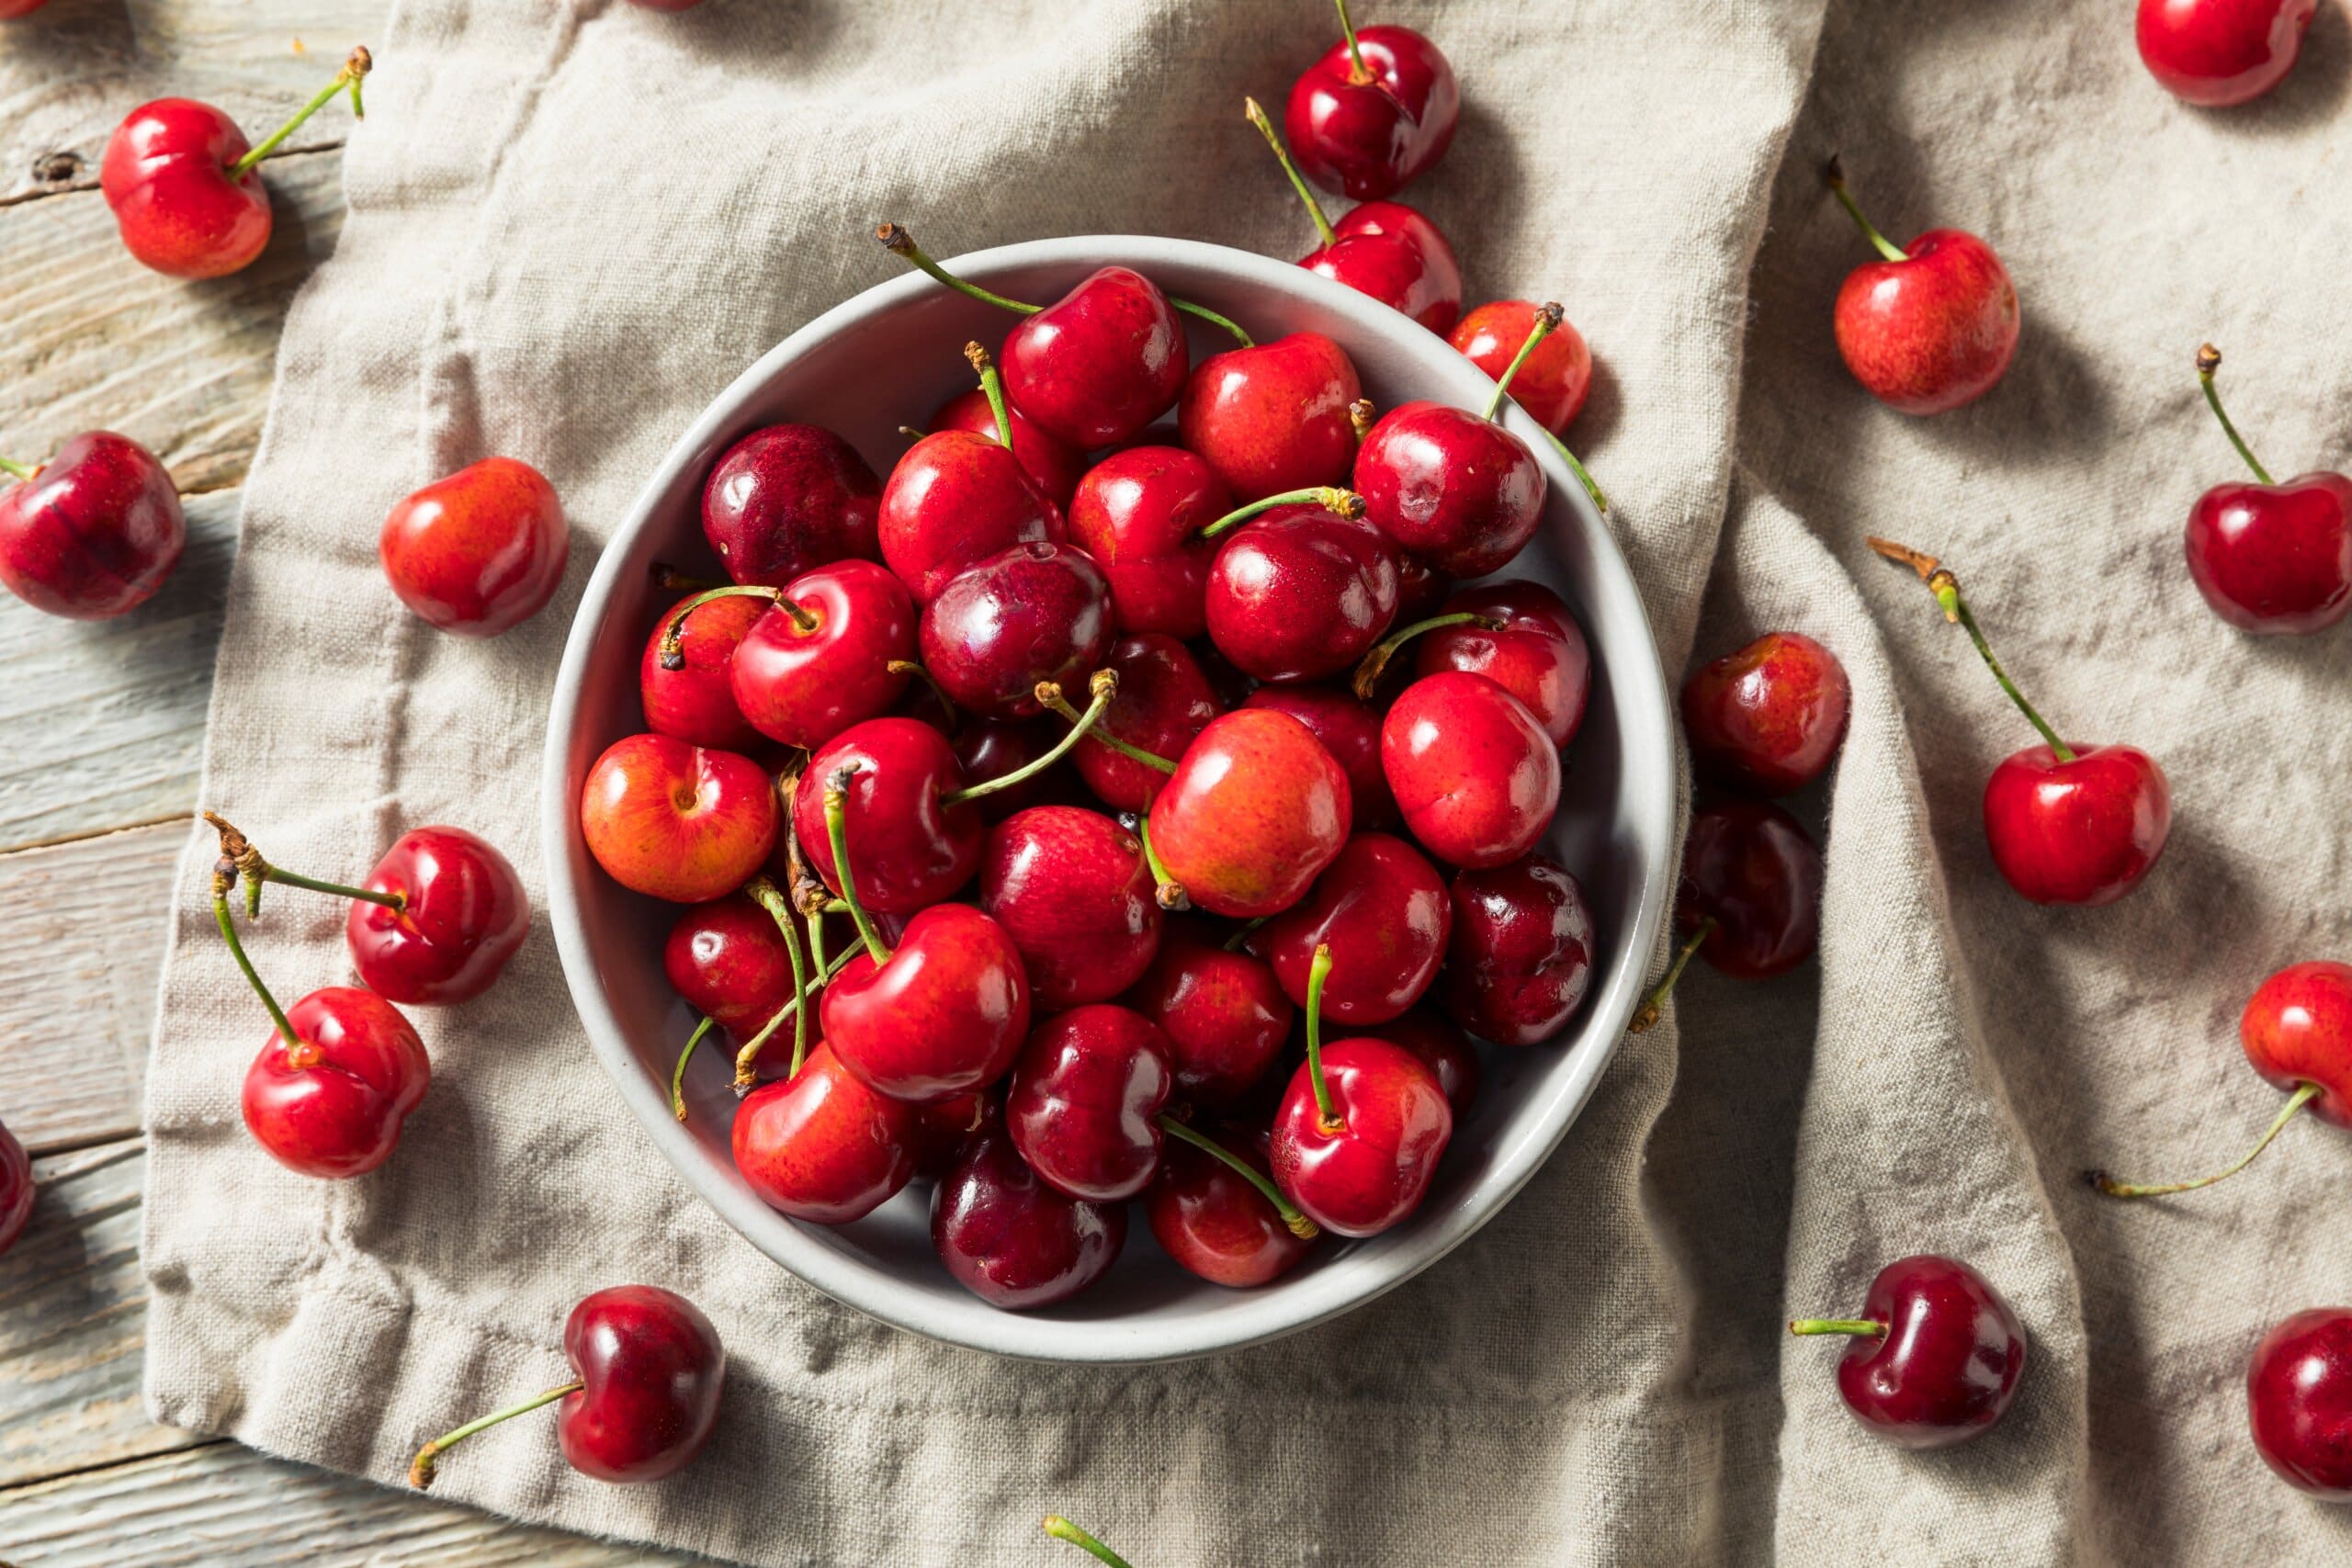 Cherries in a white bowl placed on a a table cloth with cherries around it.